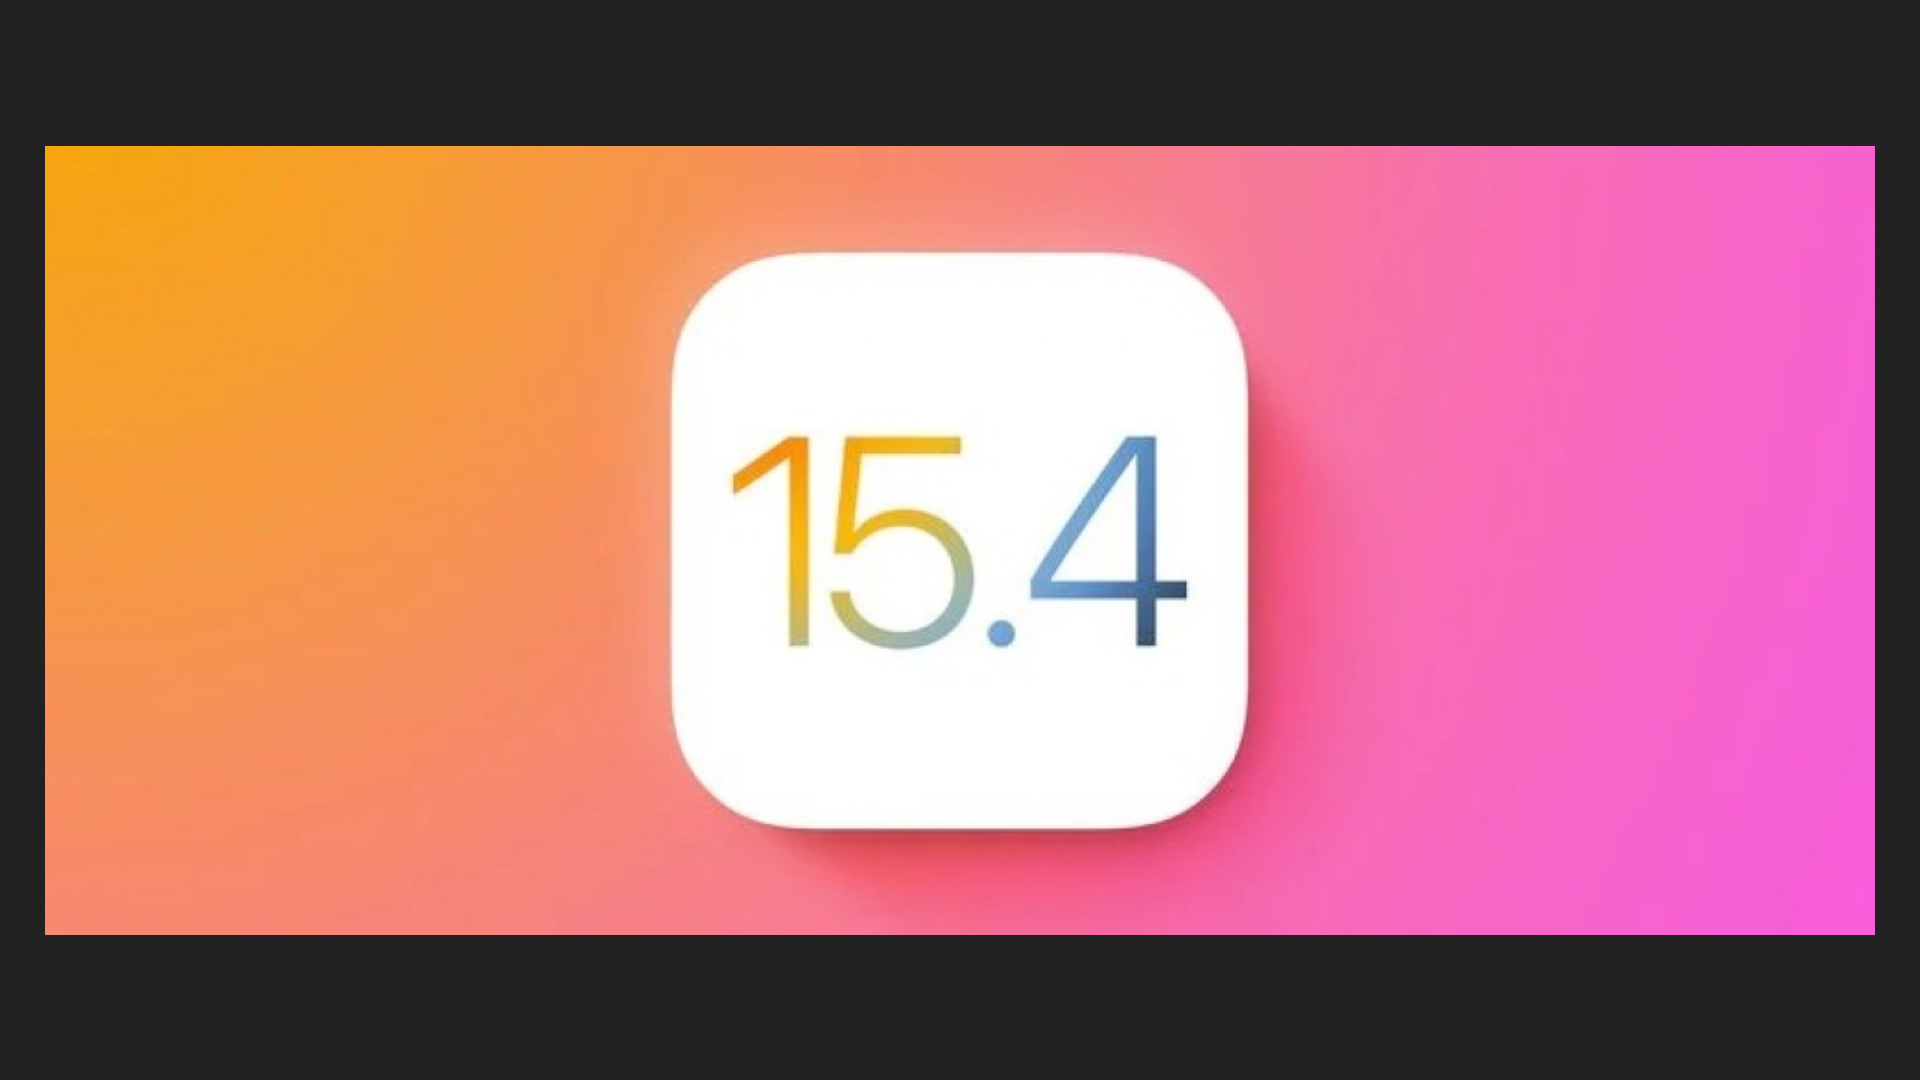 The iOS 15.4 update meets with reports of sudden-onset battery drain ...